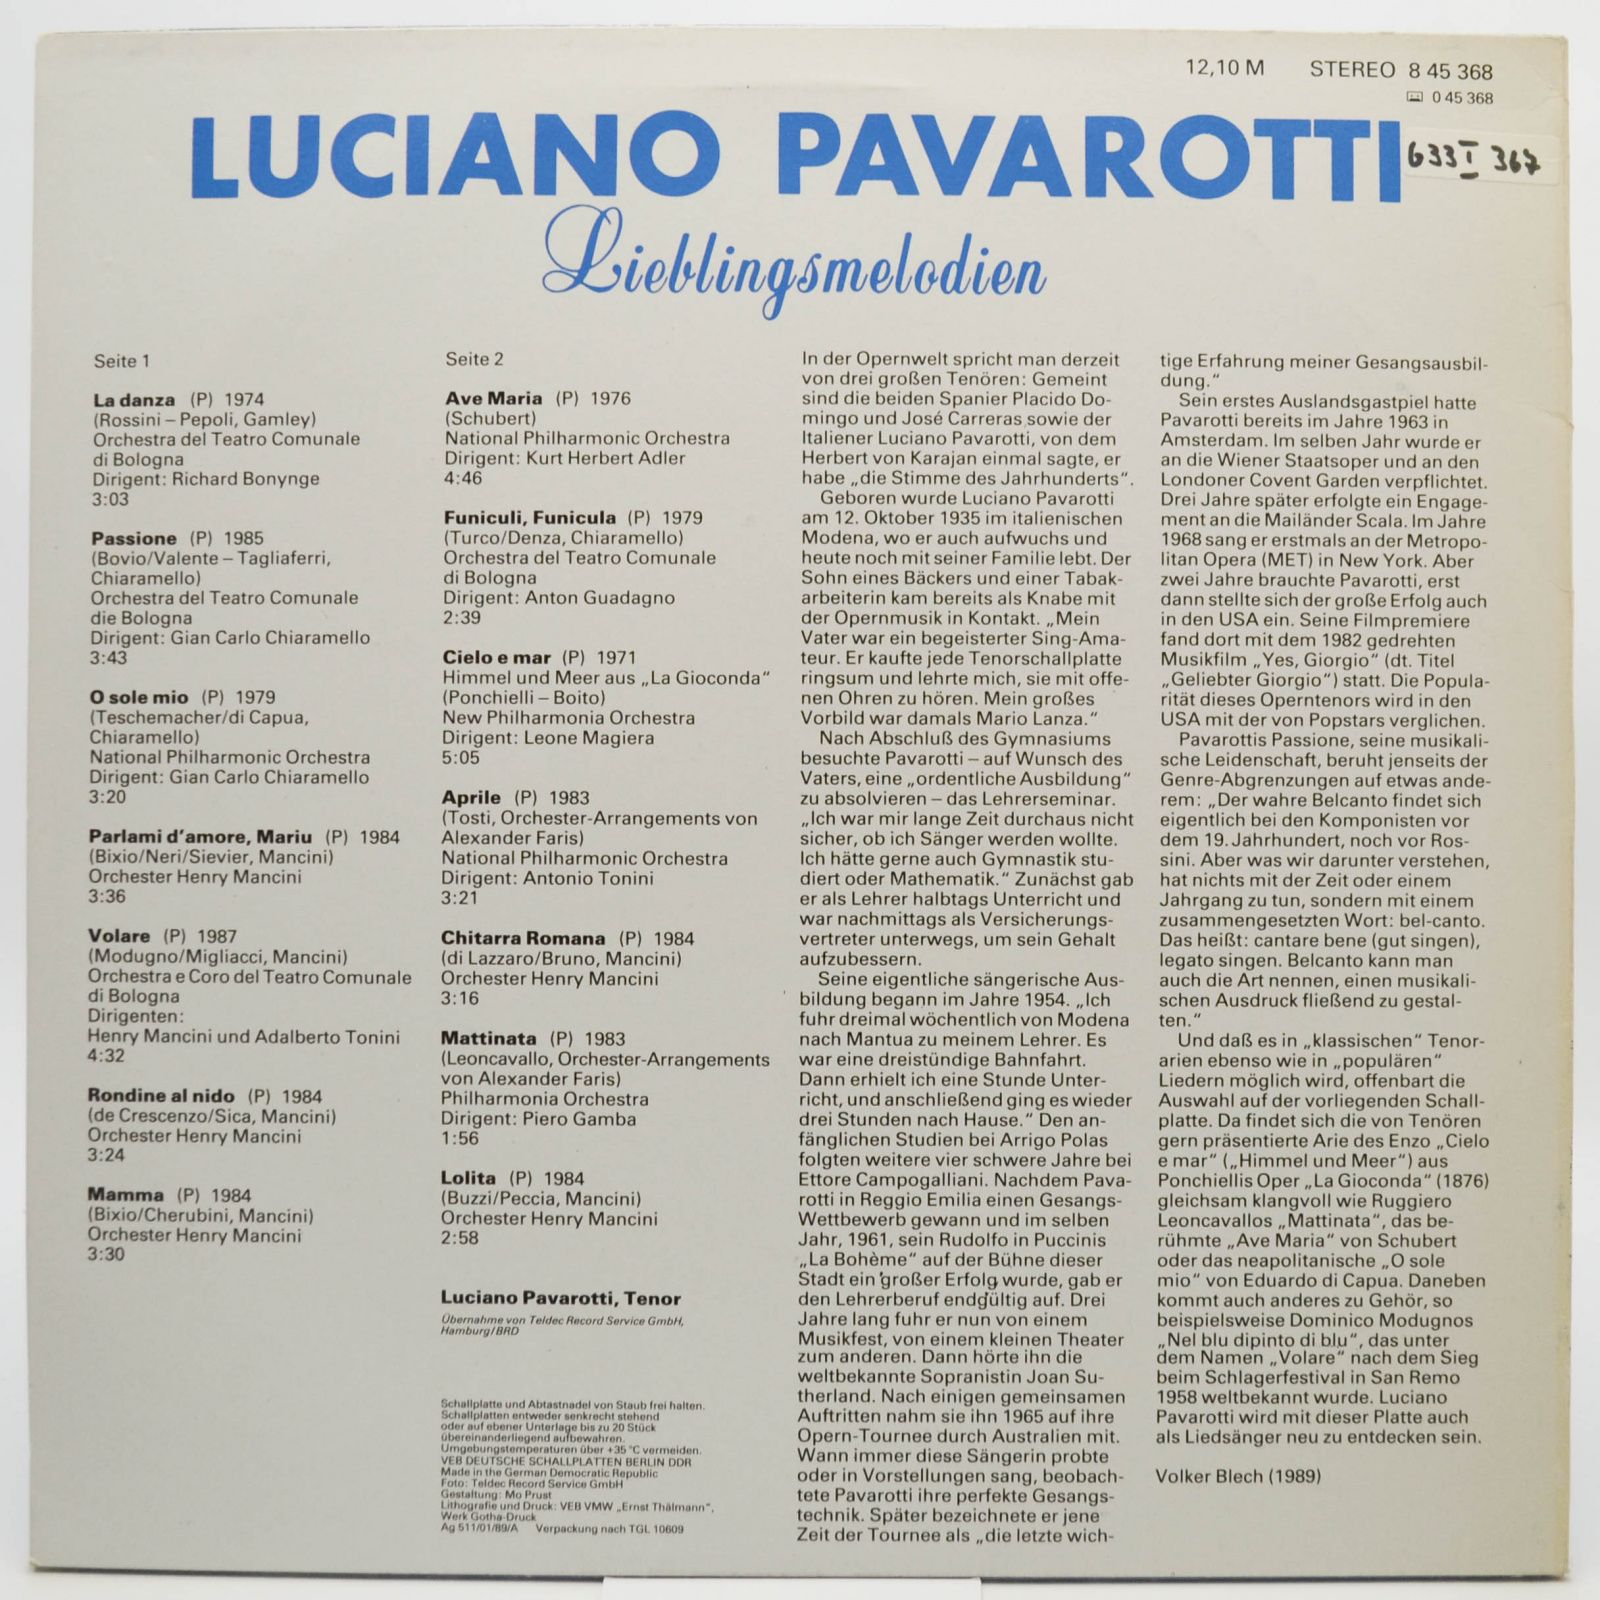 Luciano Pavarotti — Lieblingsmelodien, 1989